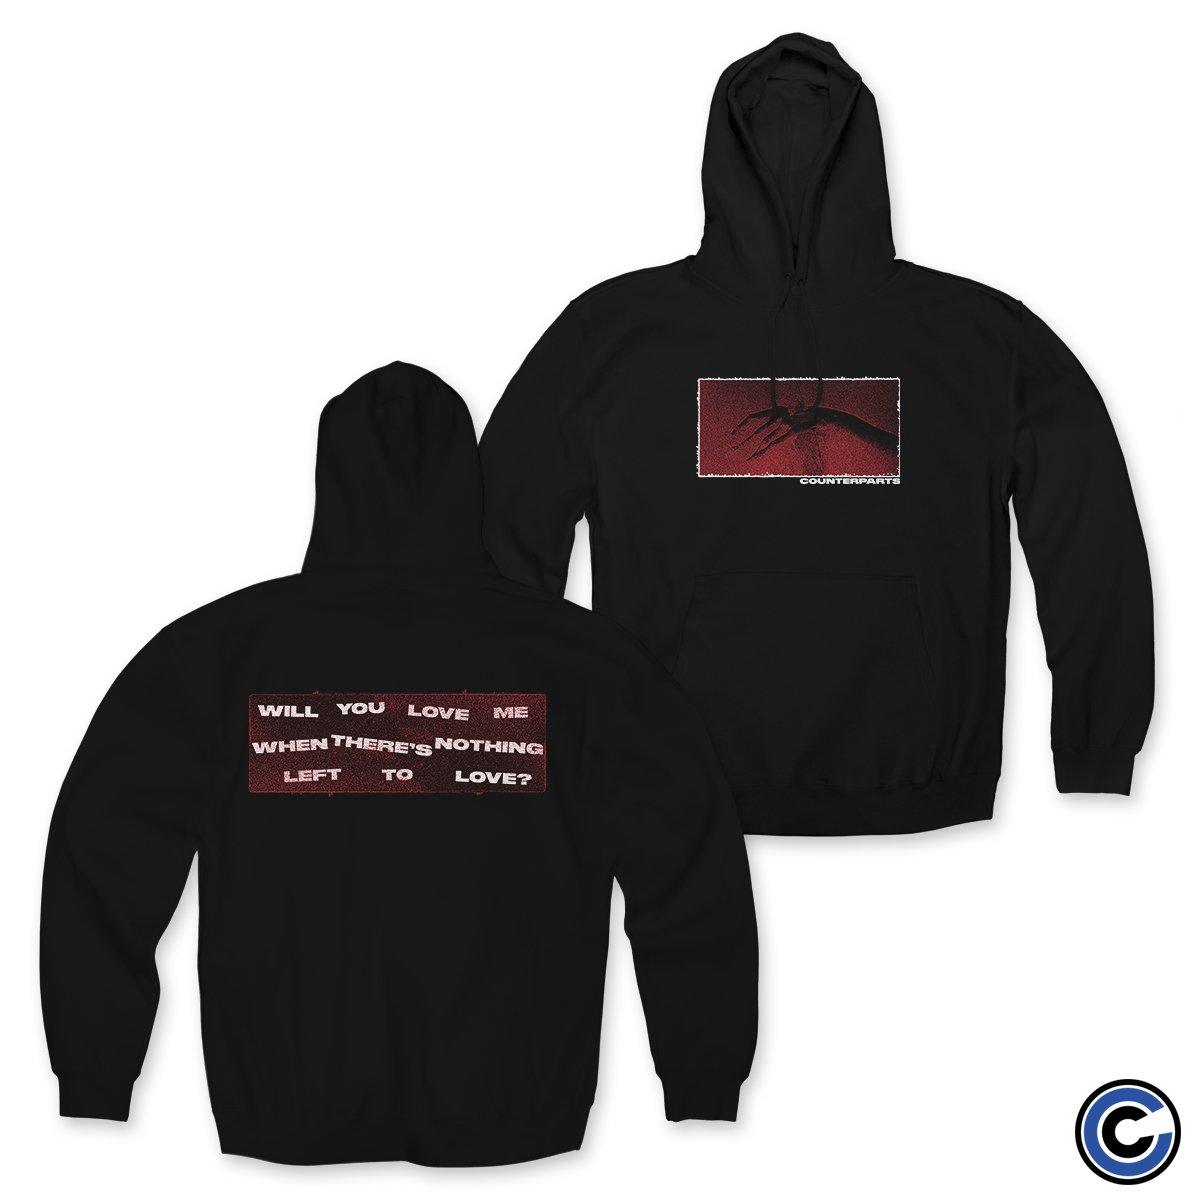 Buy – Counterparts "Love Me" Hoodie – Band & Music Merch – Cold Cuts Merch